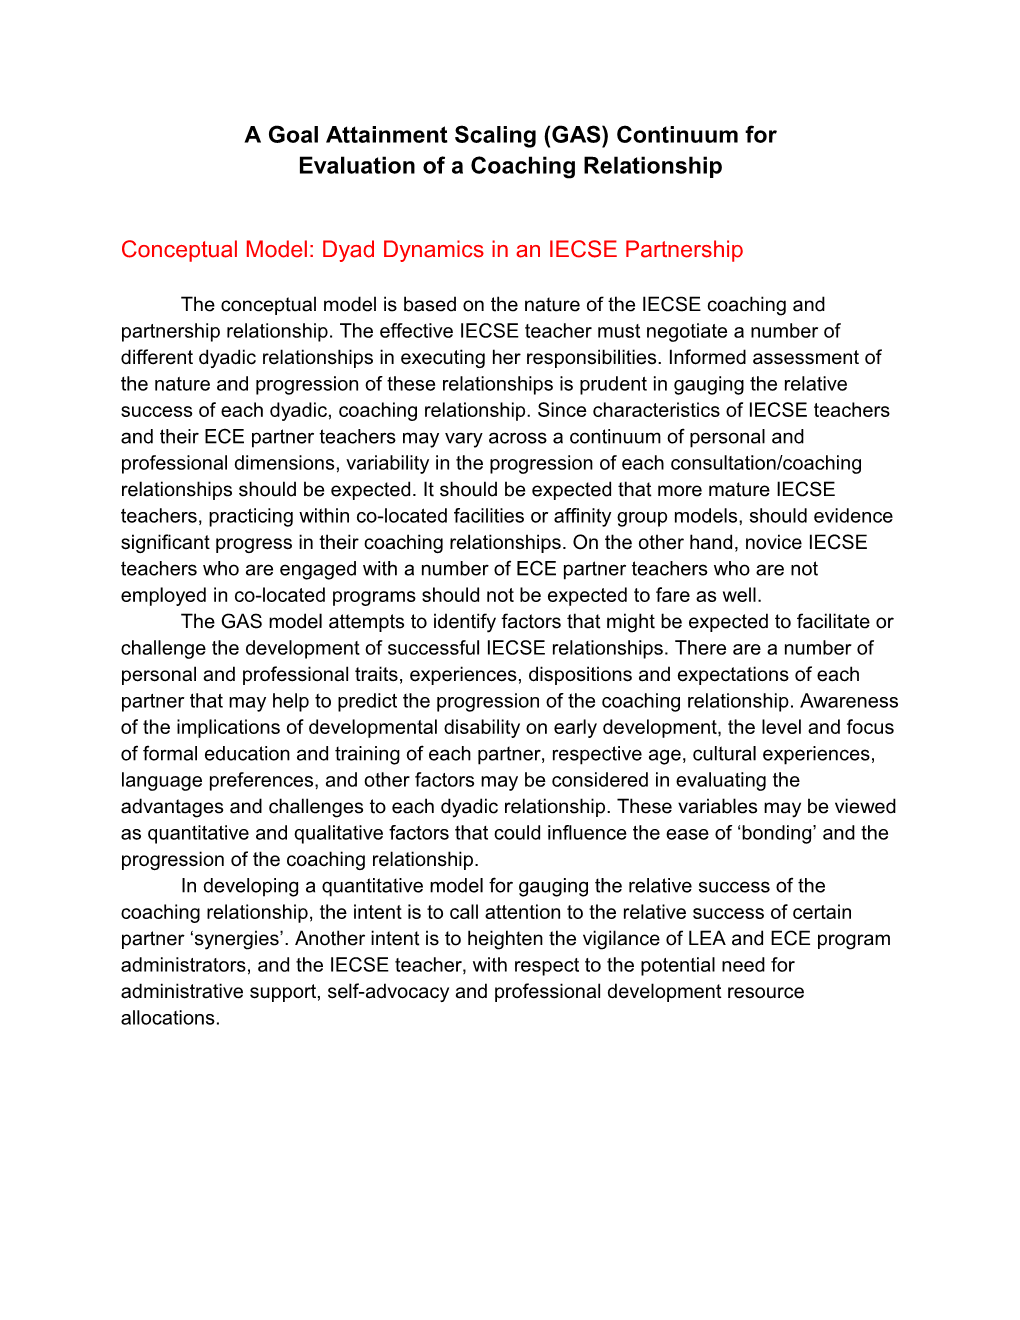 A Goal Attainment Scaling (GAS) Continuum For